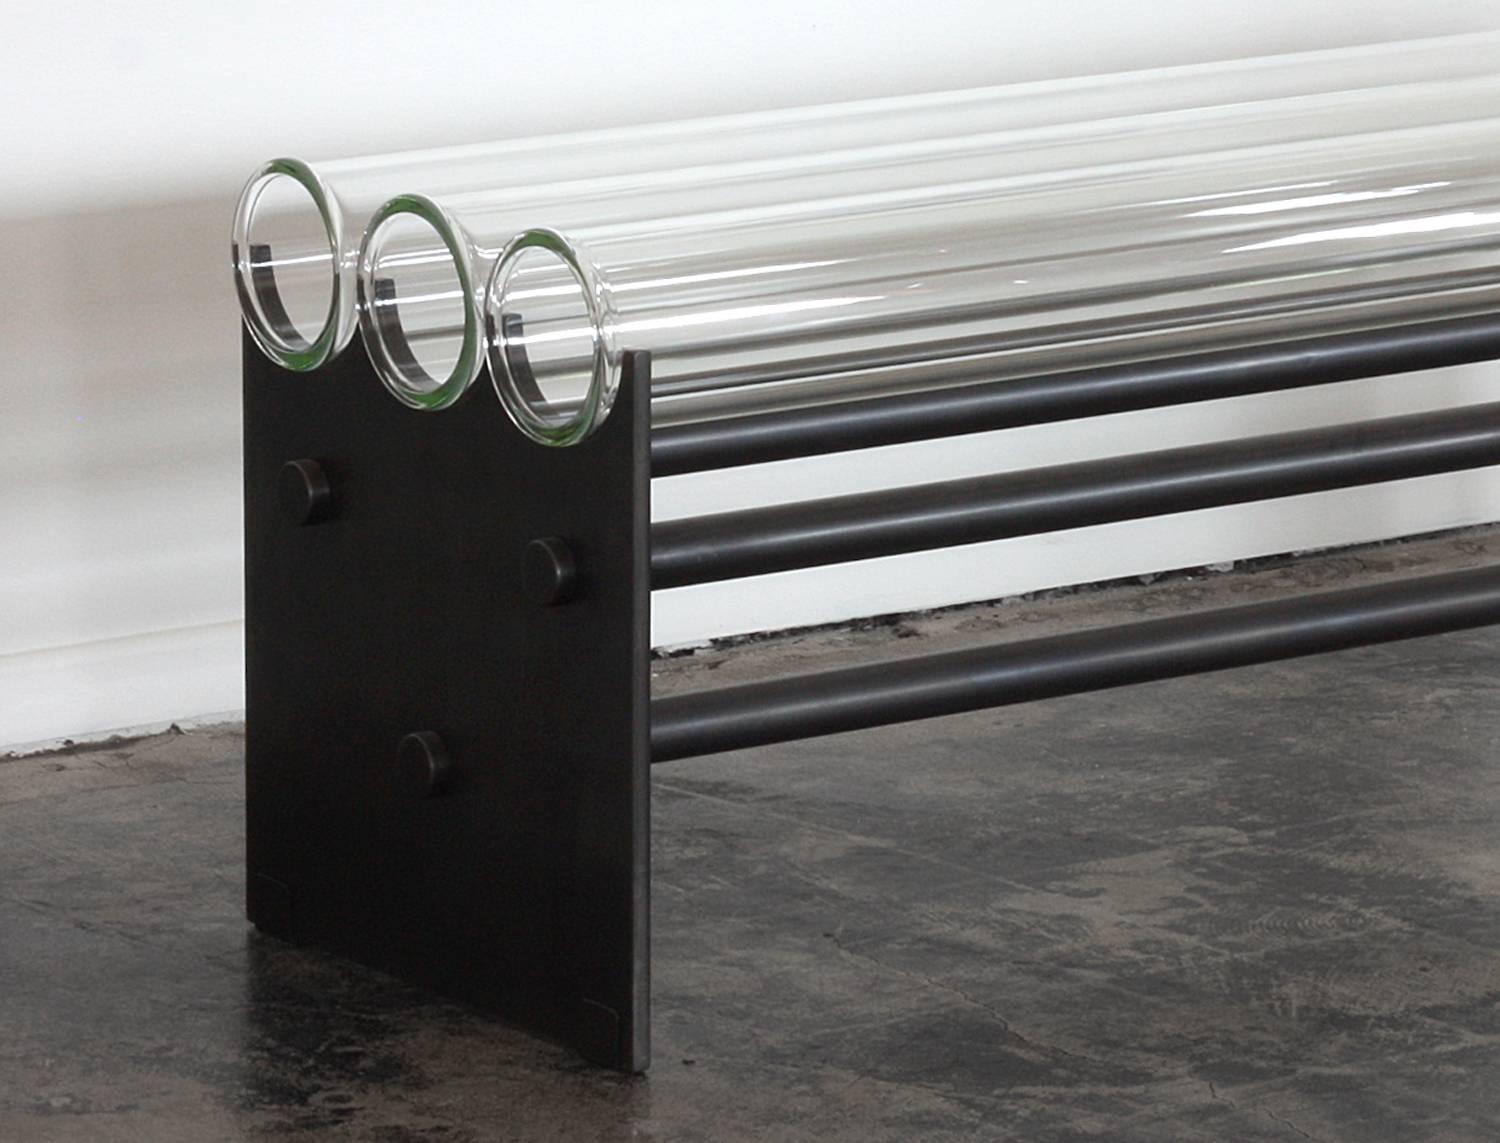 The Museum Bench was originally envisioned to be placed near art, as to not obstruct the view. 
This heavy industrial minimal modern piece is definitely a conversation starter. 
It's made of commercial grade glass pipes strong enough to hold up to